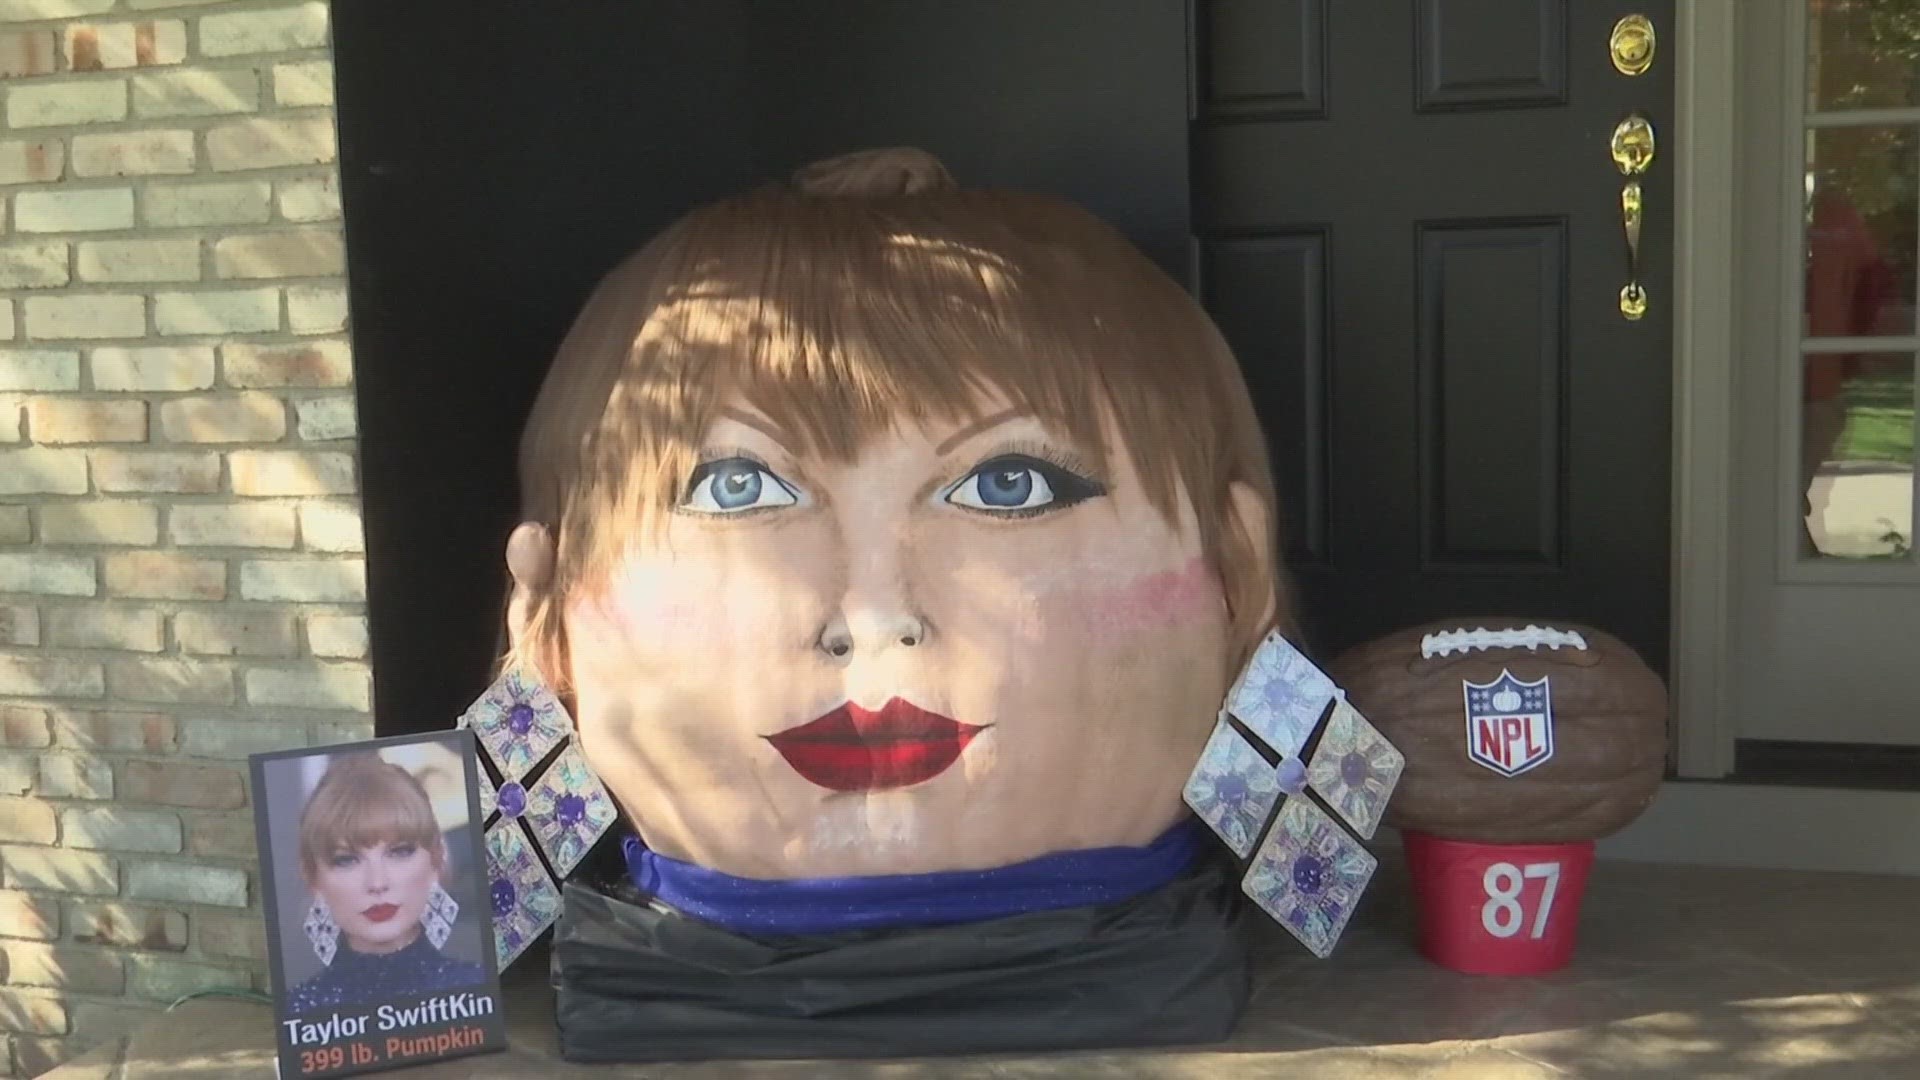 For 35 years, Jeanette Paras of Dublin, Ohio, has decorated pumpkins to look like celebrities.